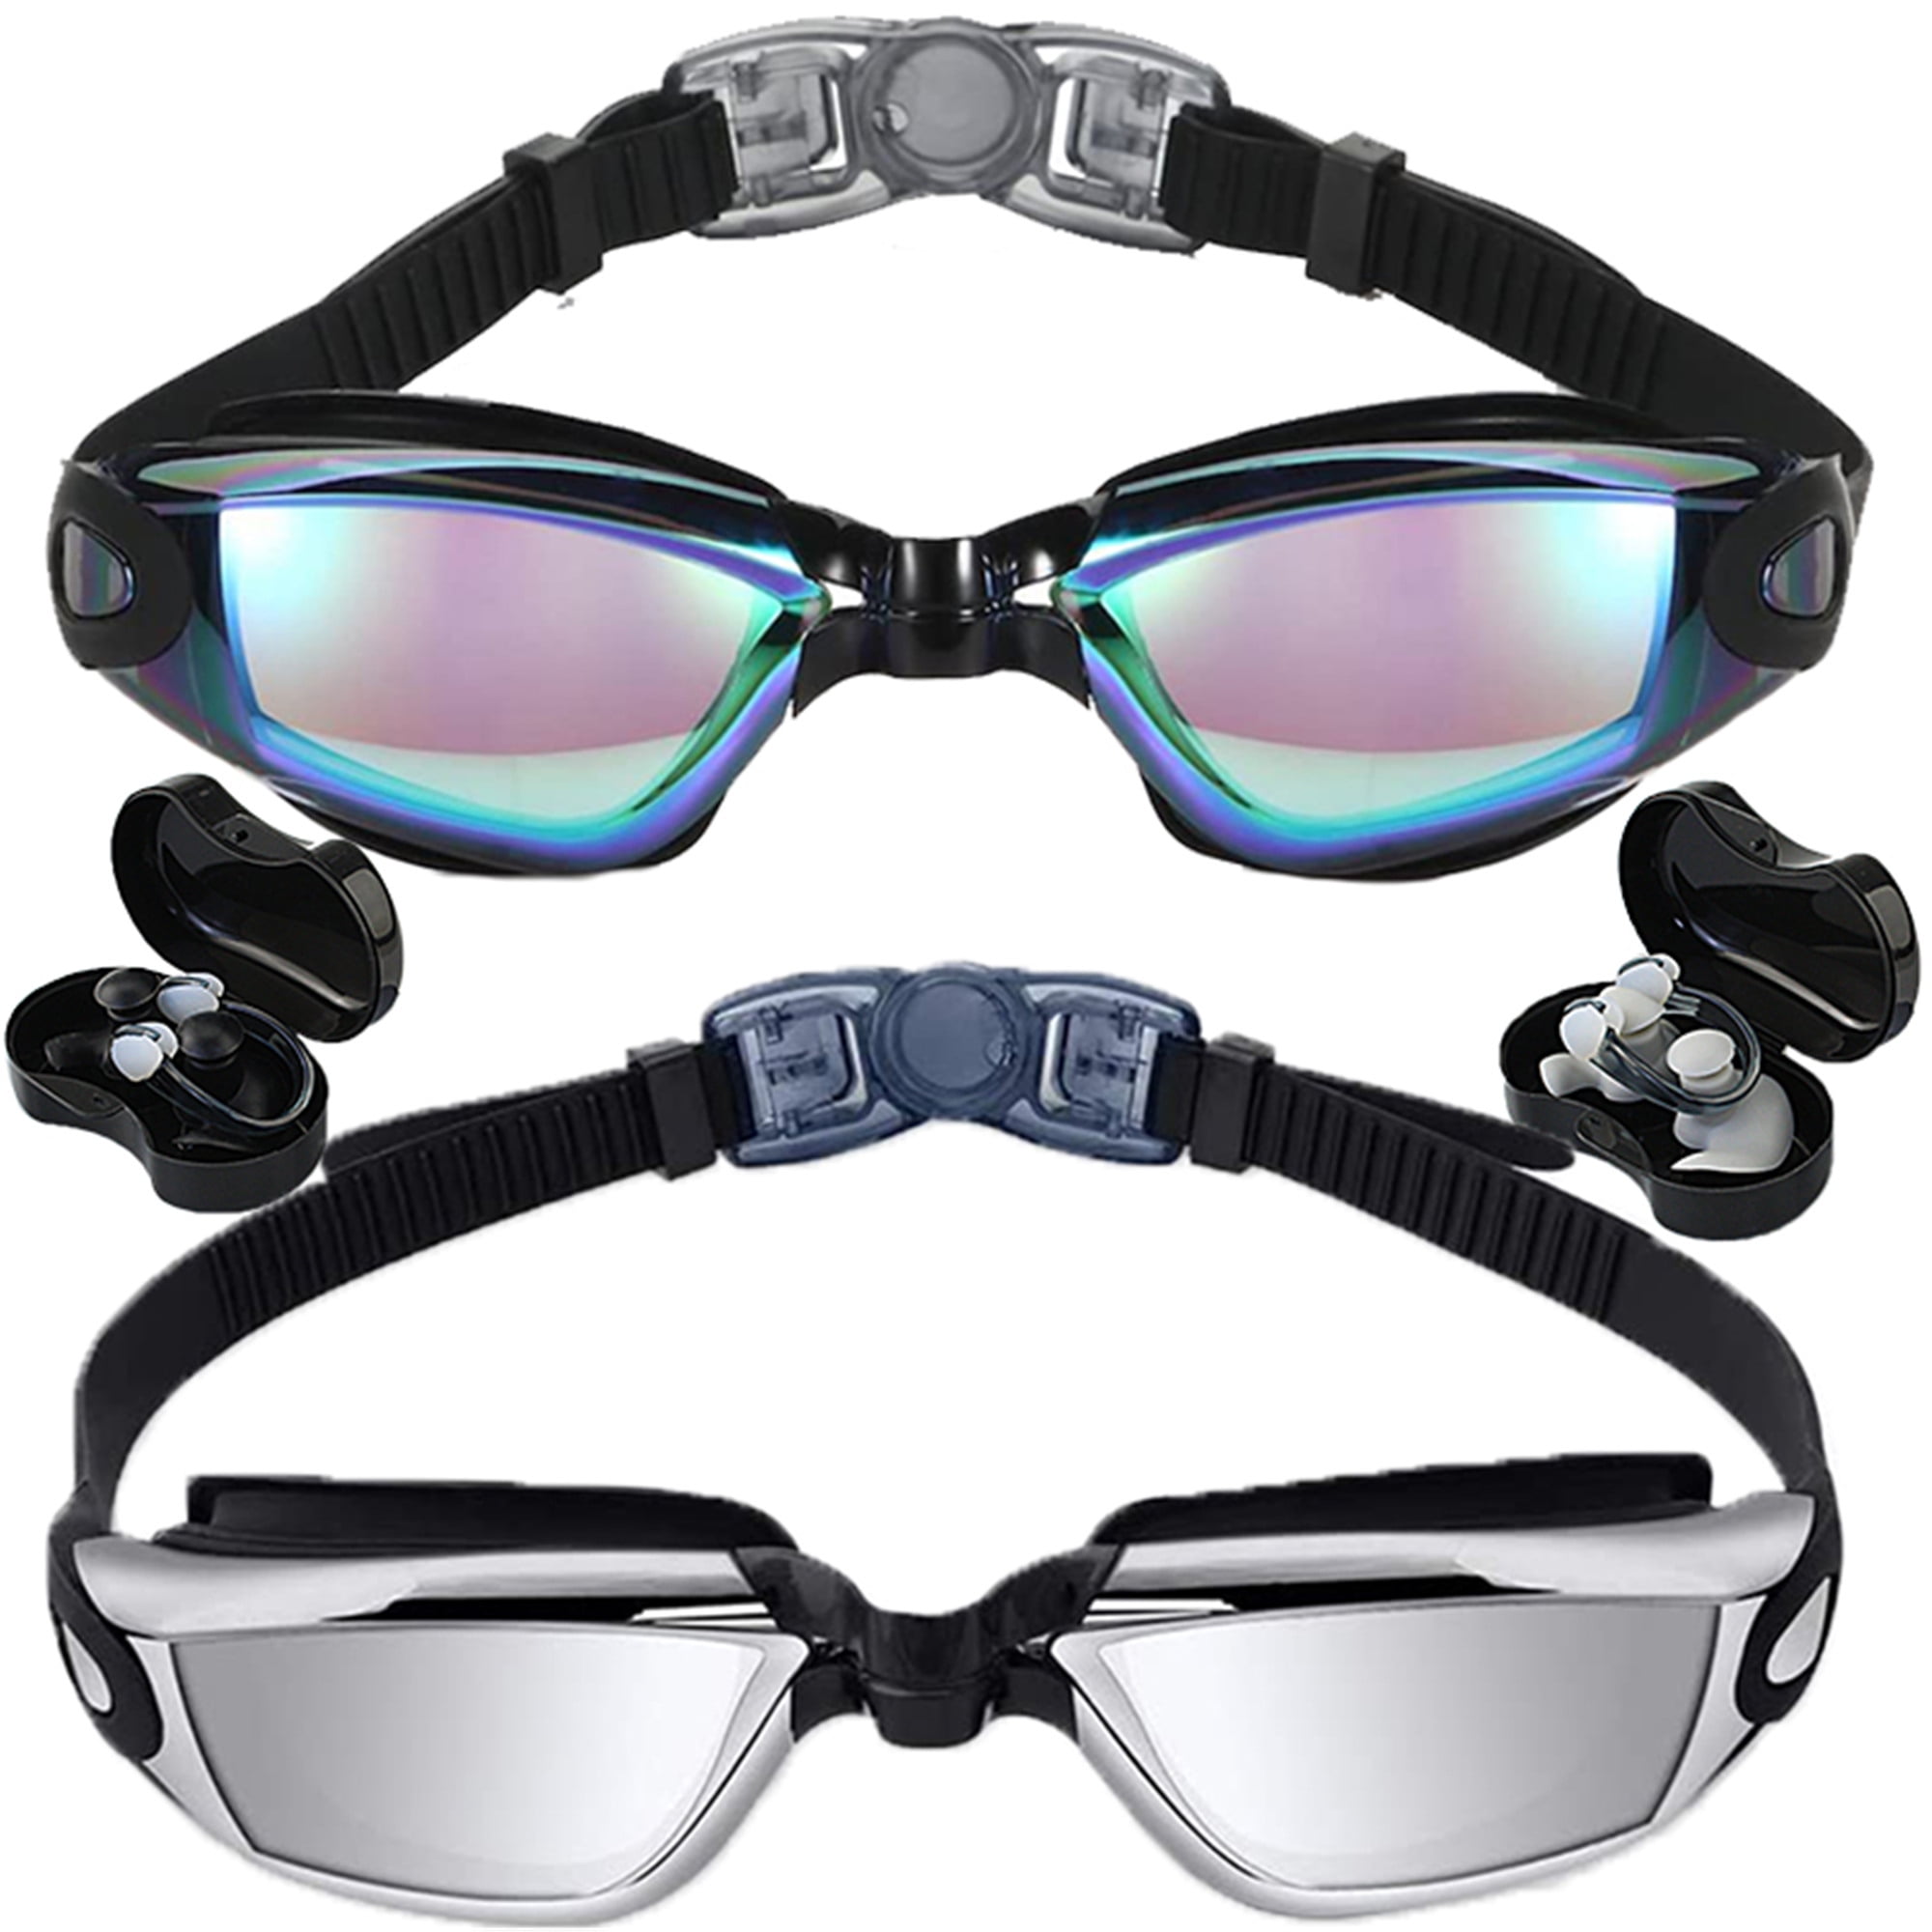 Swimming Goggles Swimming Glasses with Earplug Nose Clip Electroplate Waterproof 